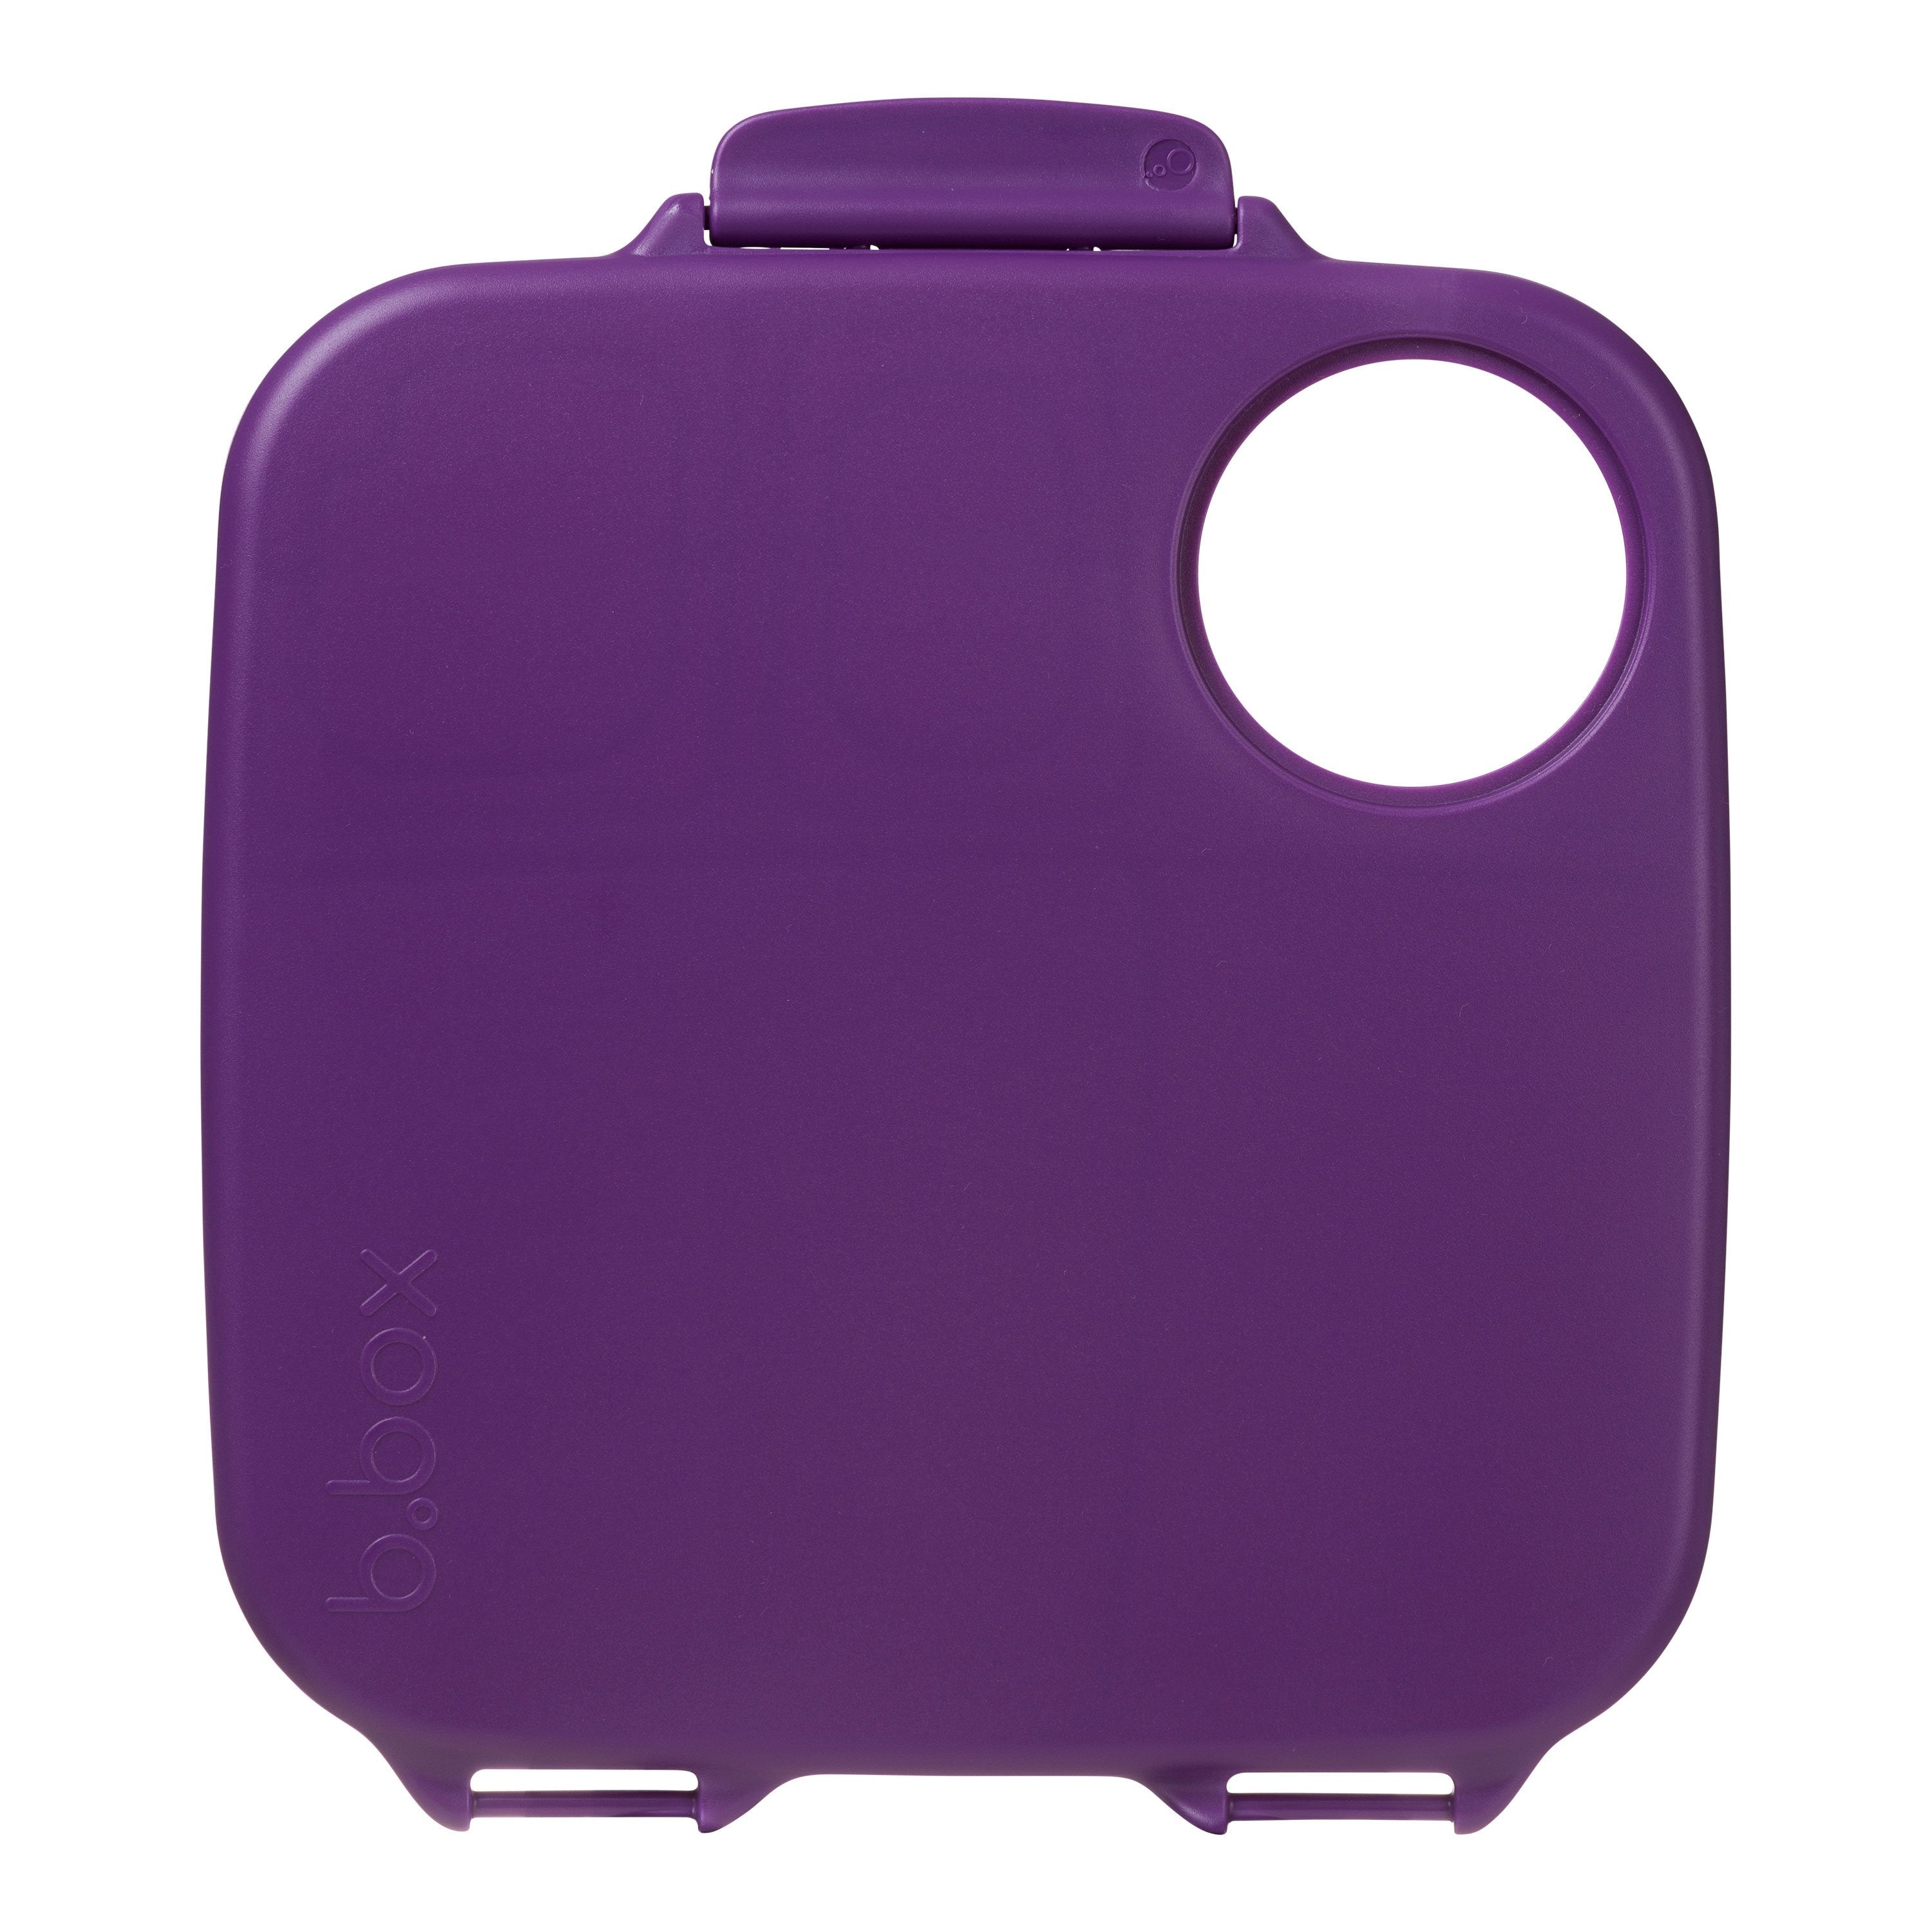 b.box Lunchbox Replacement Lid - Large